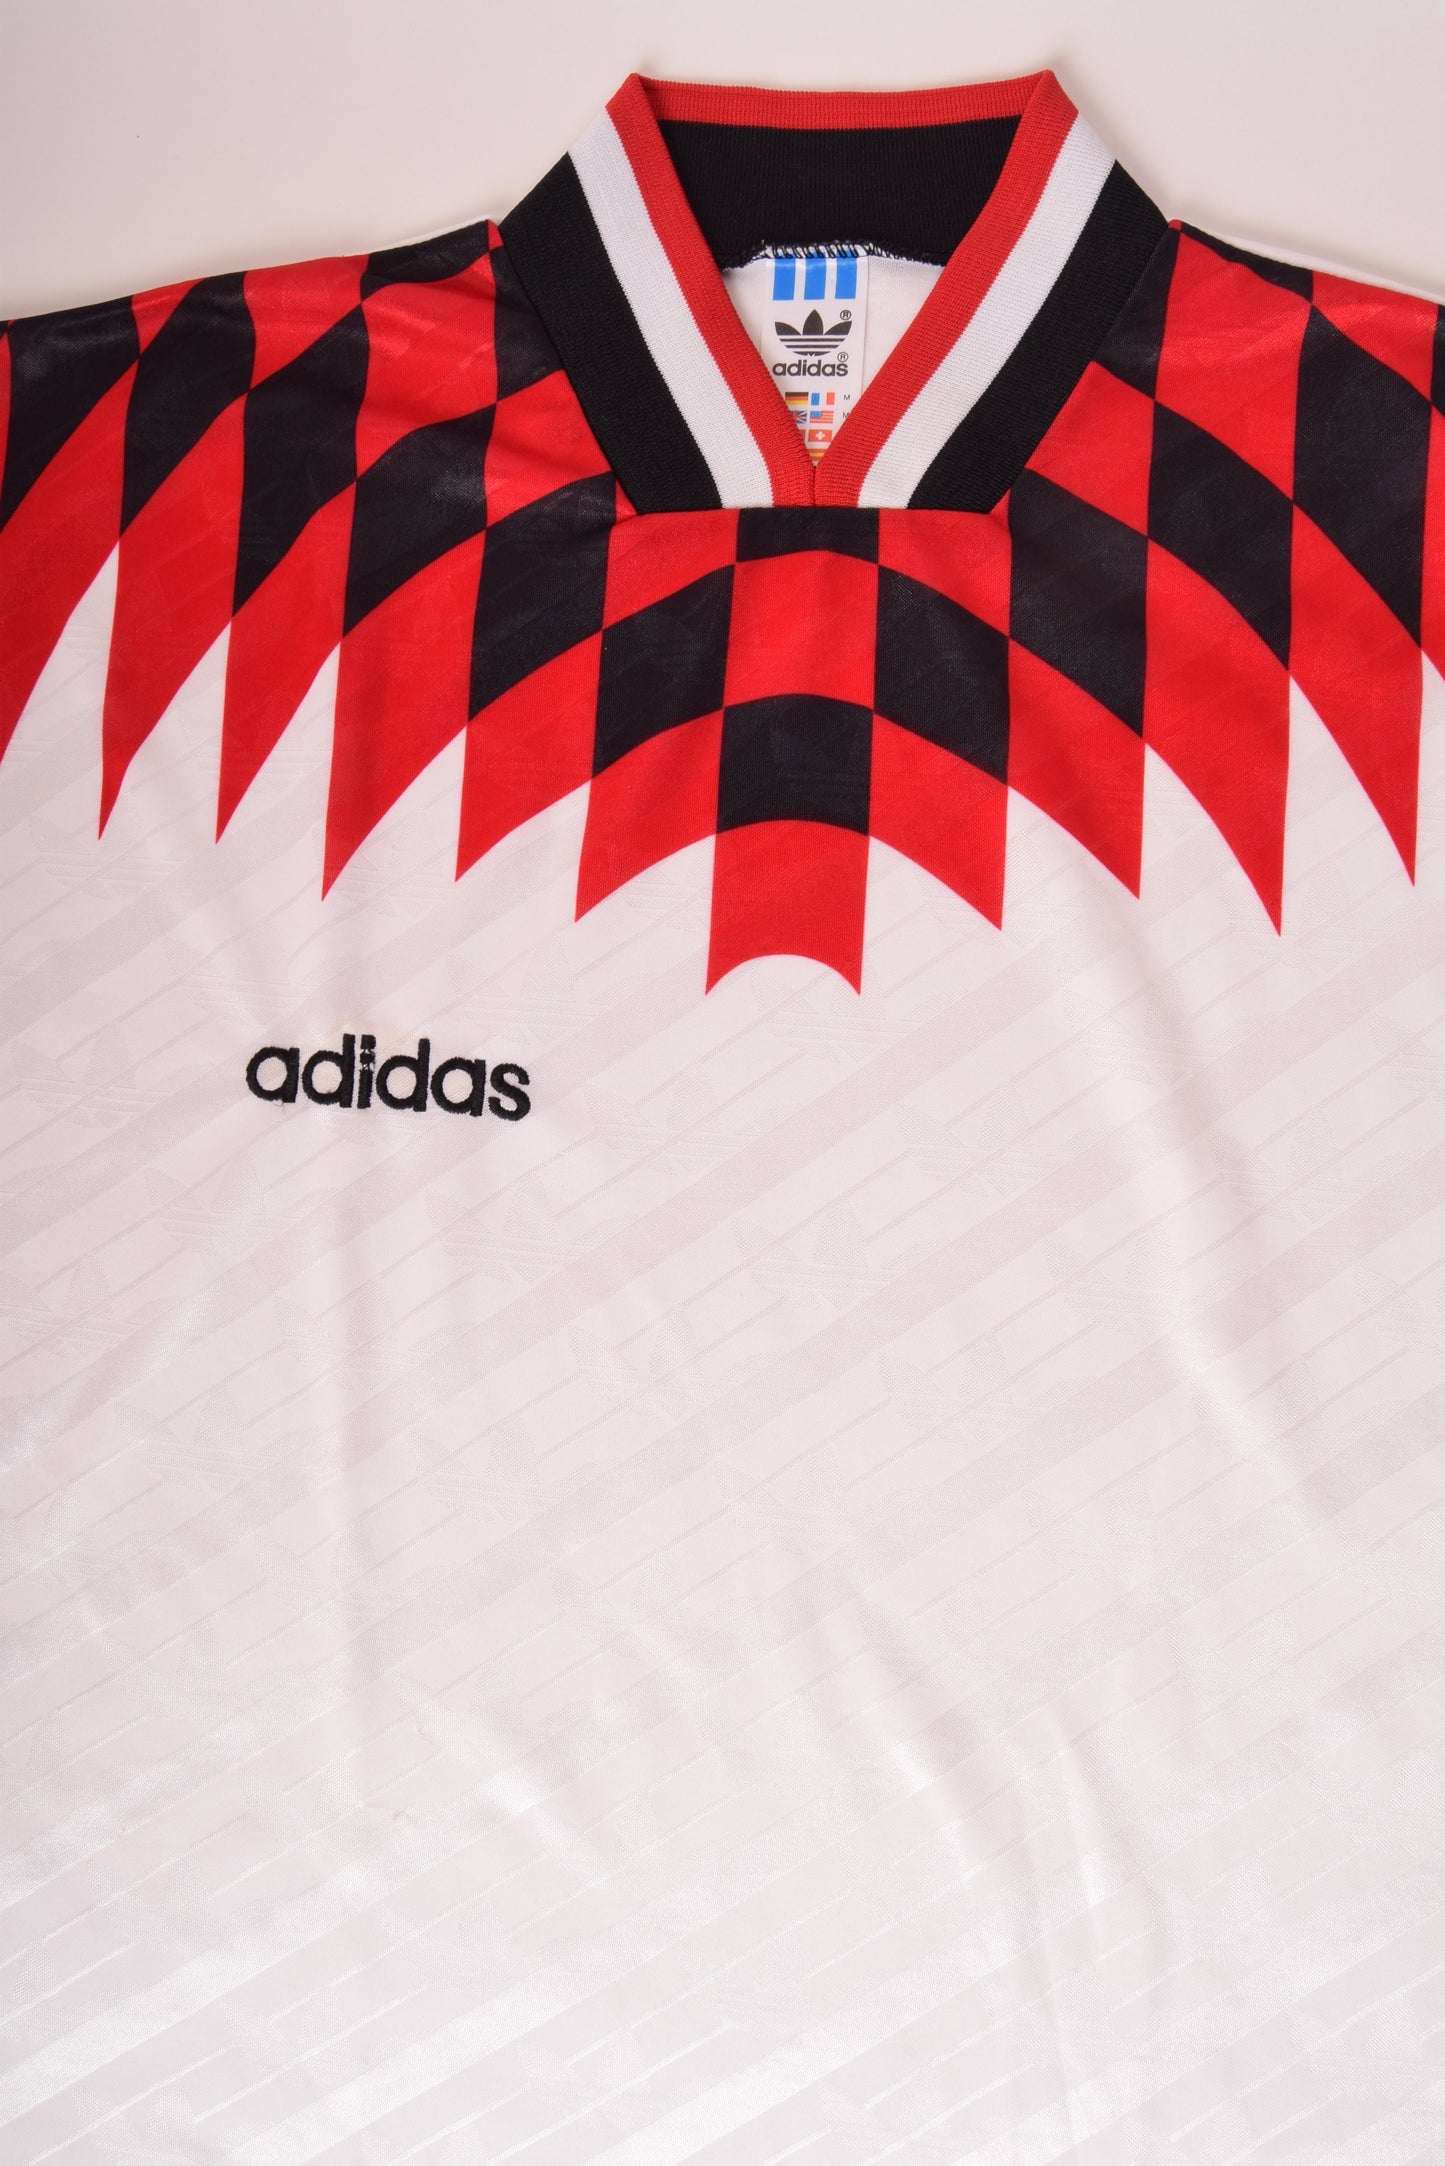 Vintage Adidas Football Shirt 1994-1995 Tamplate Size M Made in UK White Black Red